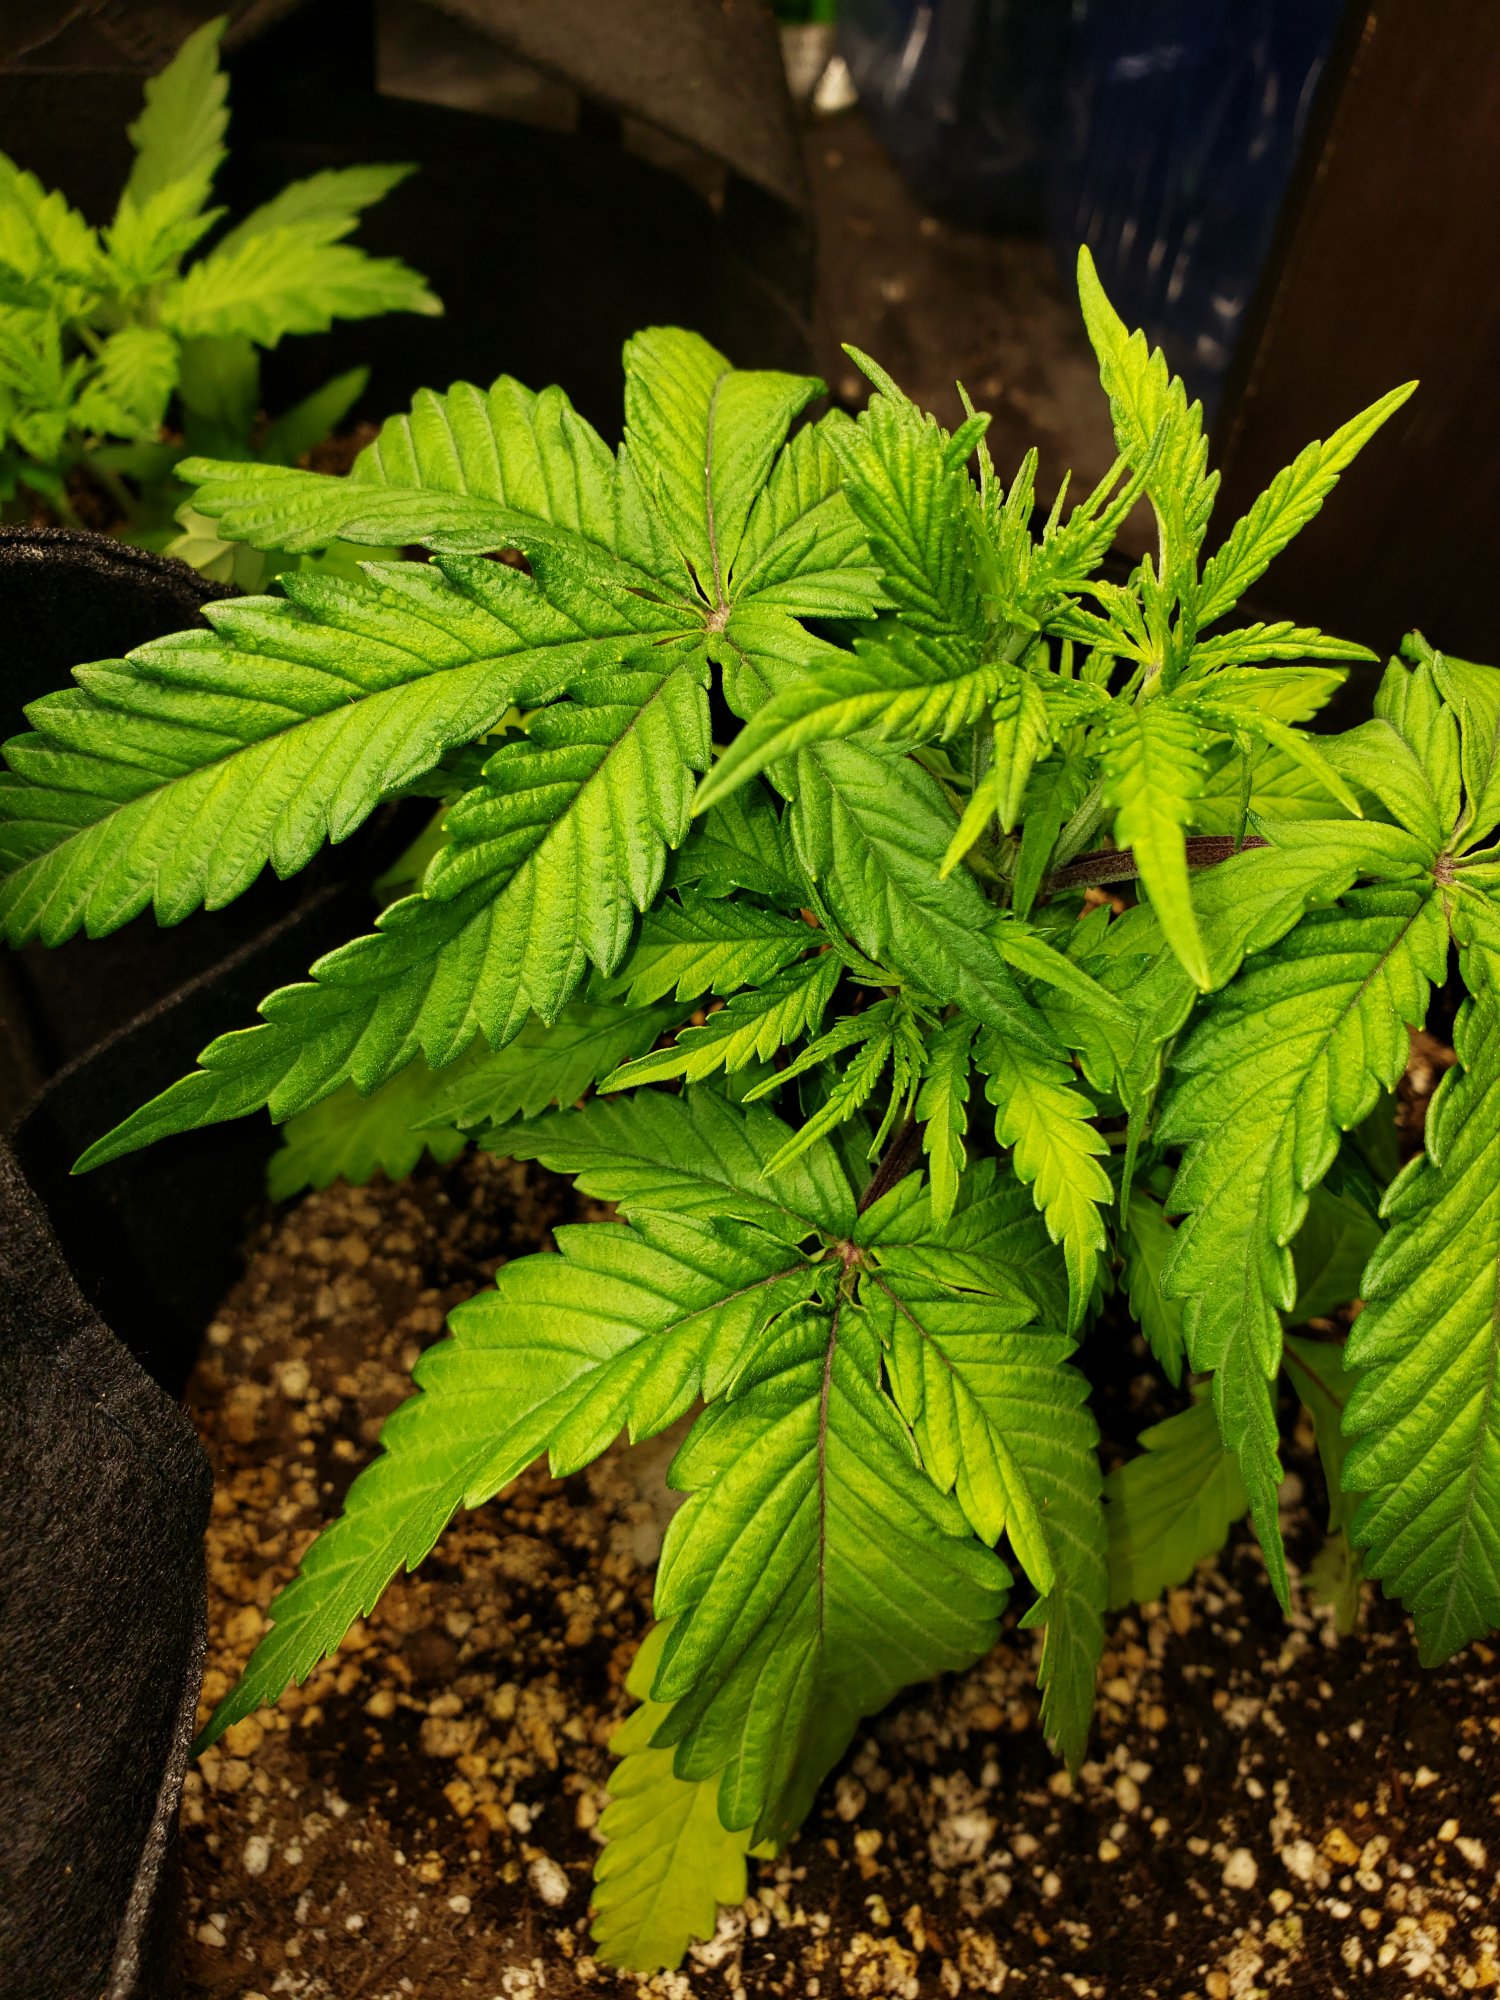 Is this plant doing good